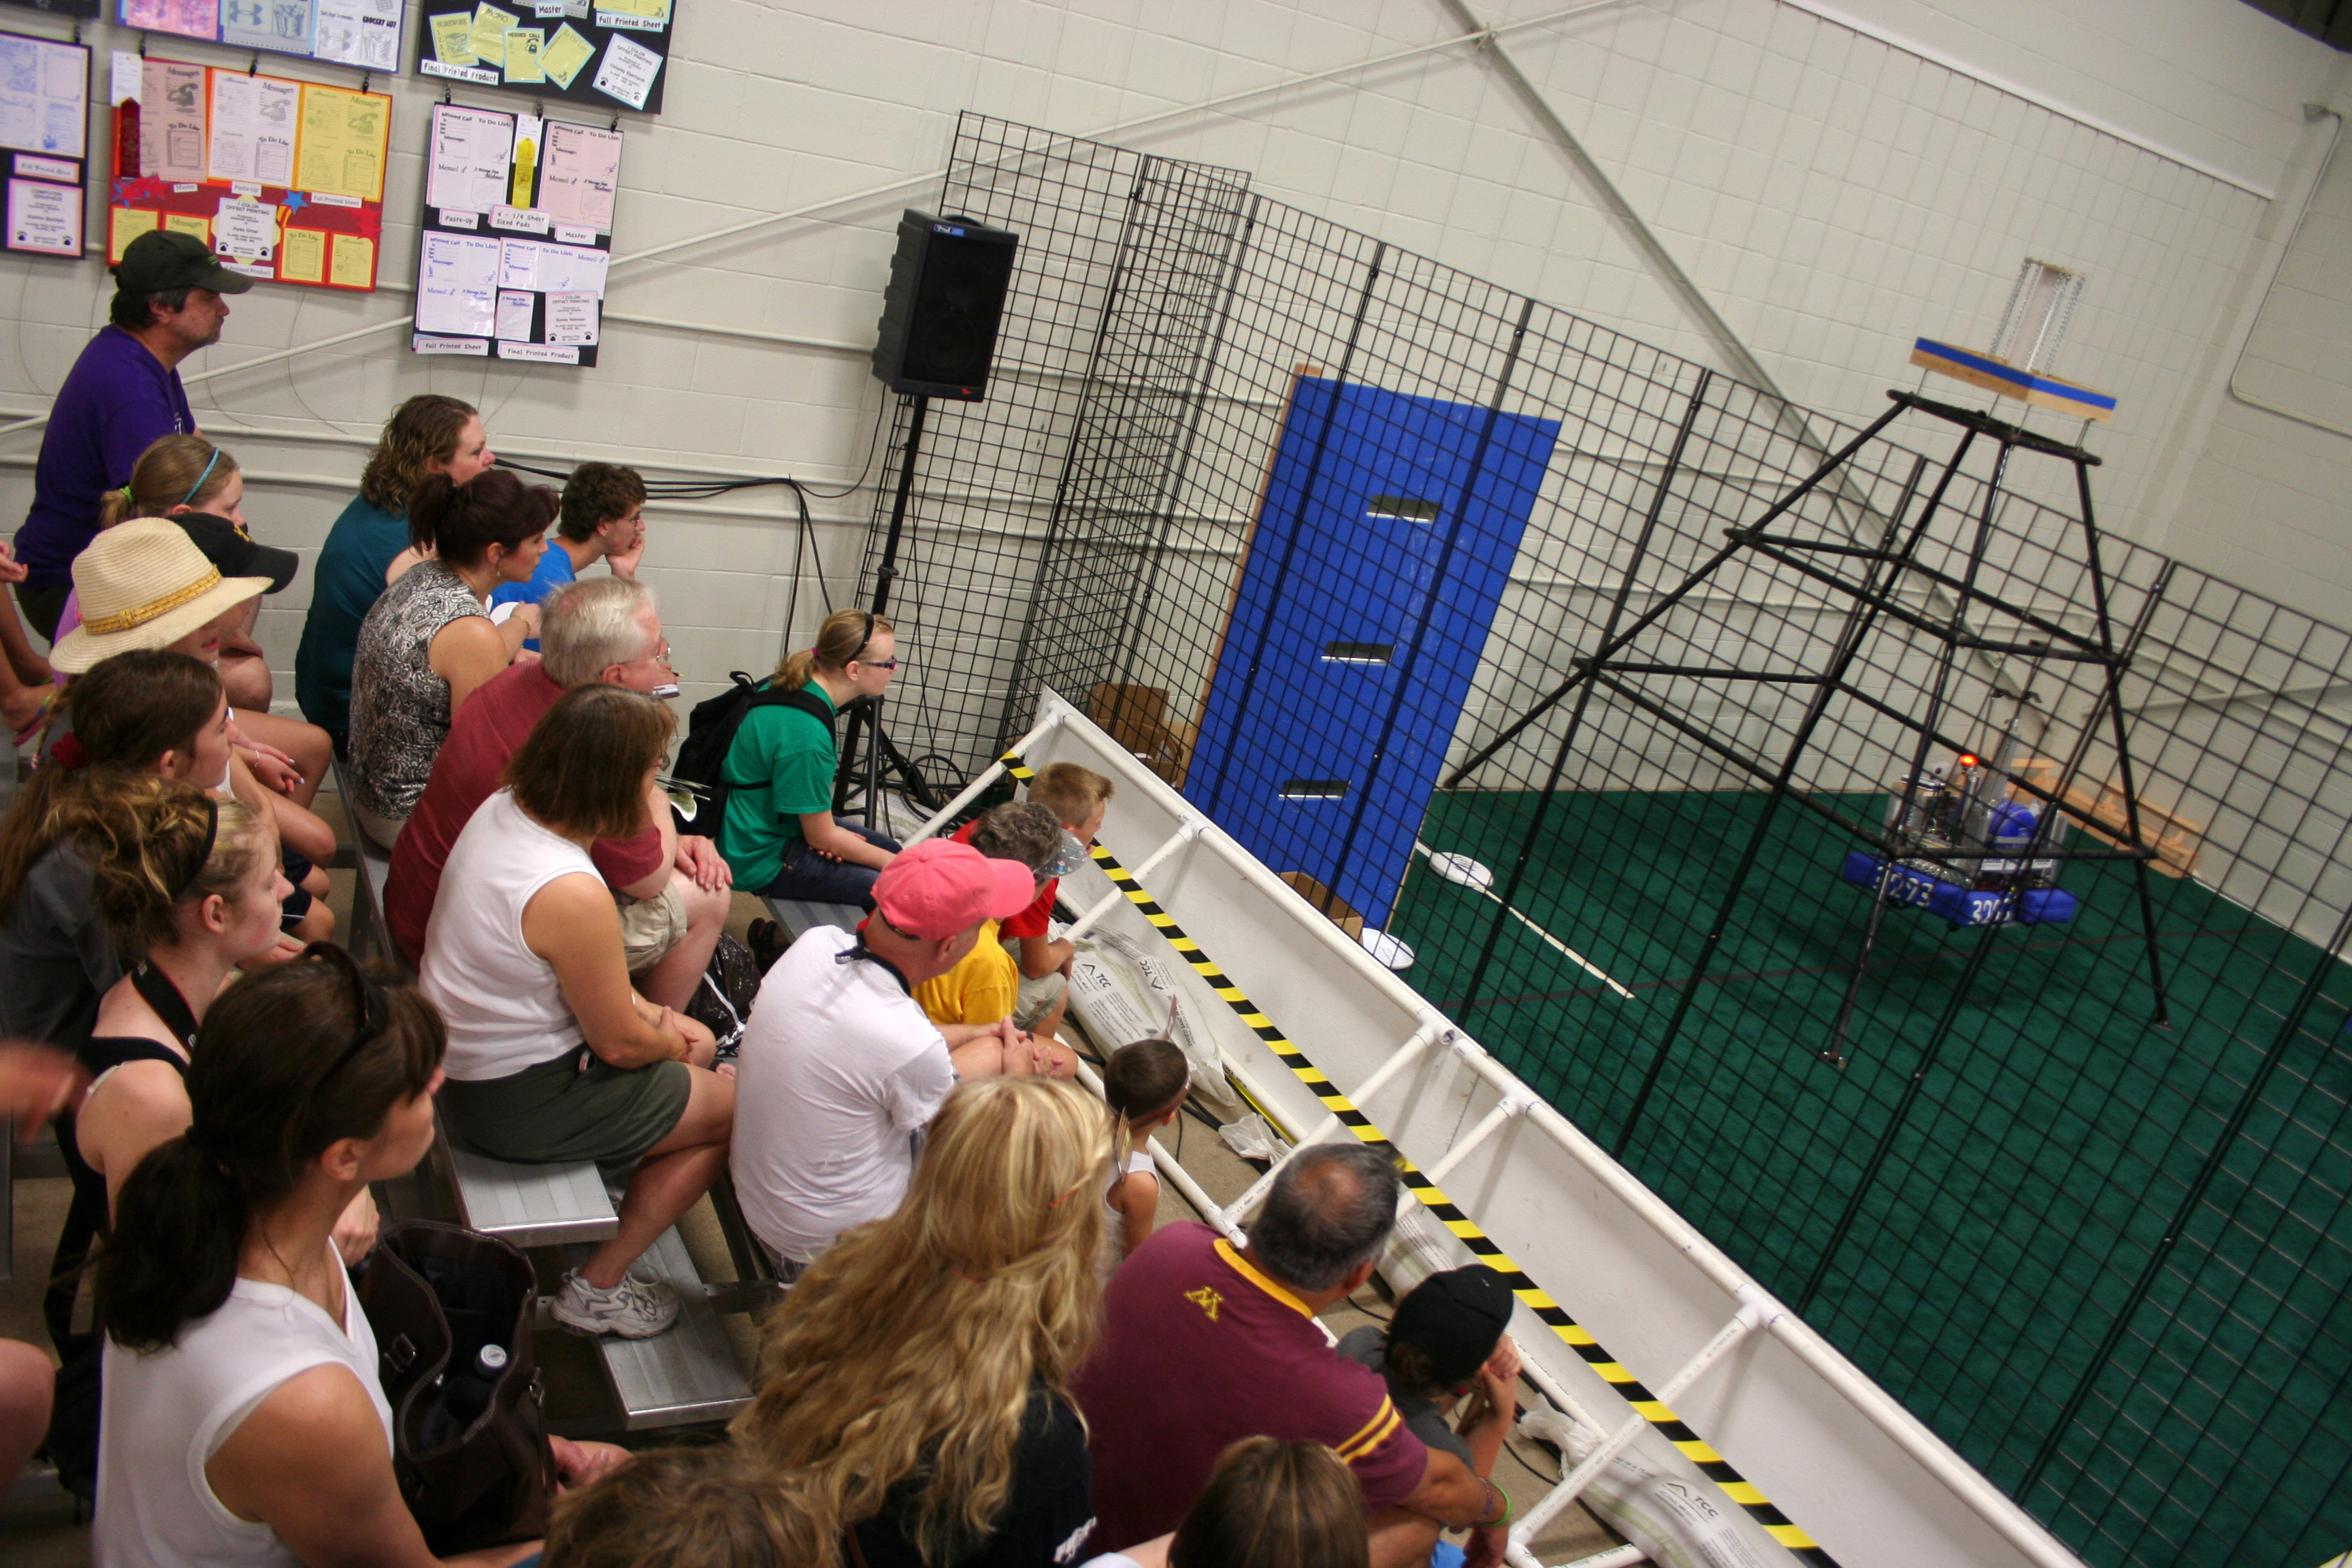 About 50 spectators packed two stands for the robotics competition. (credit: CBS)